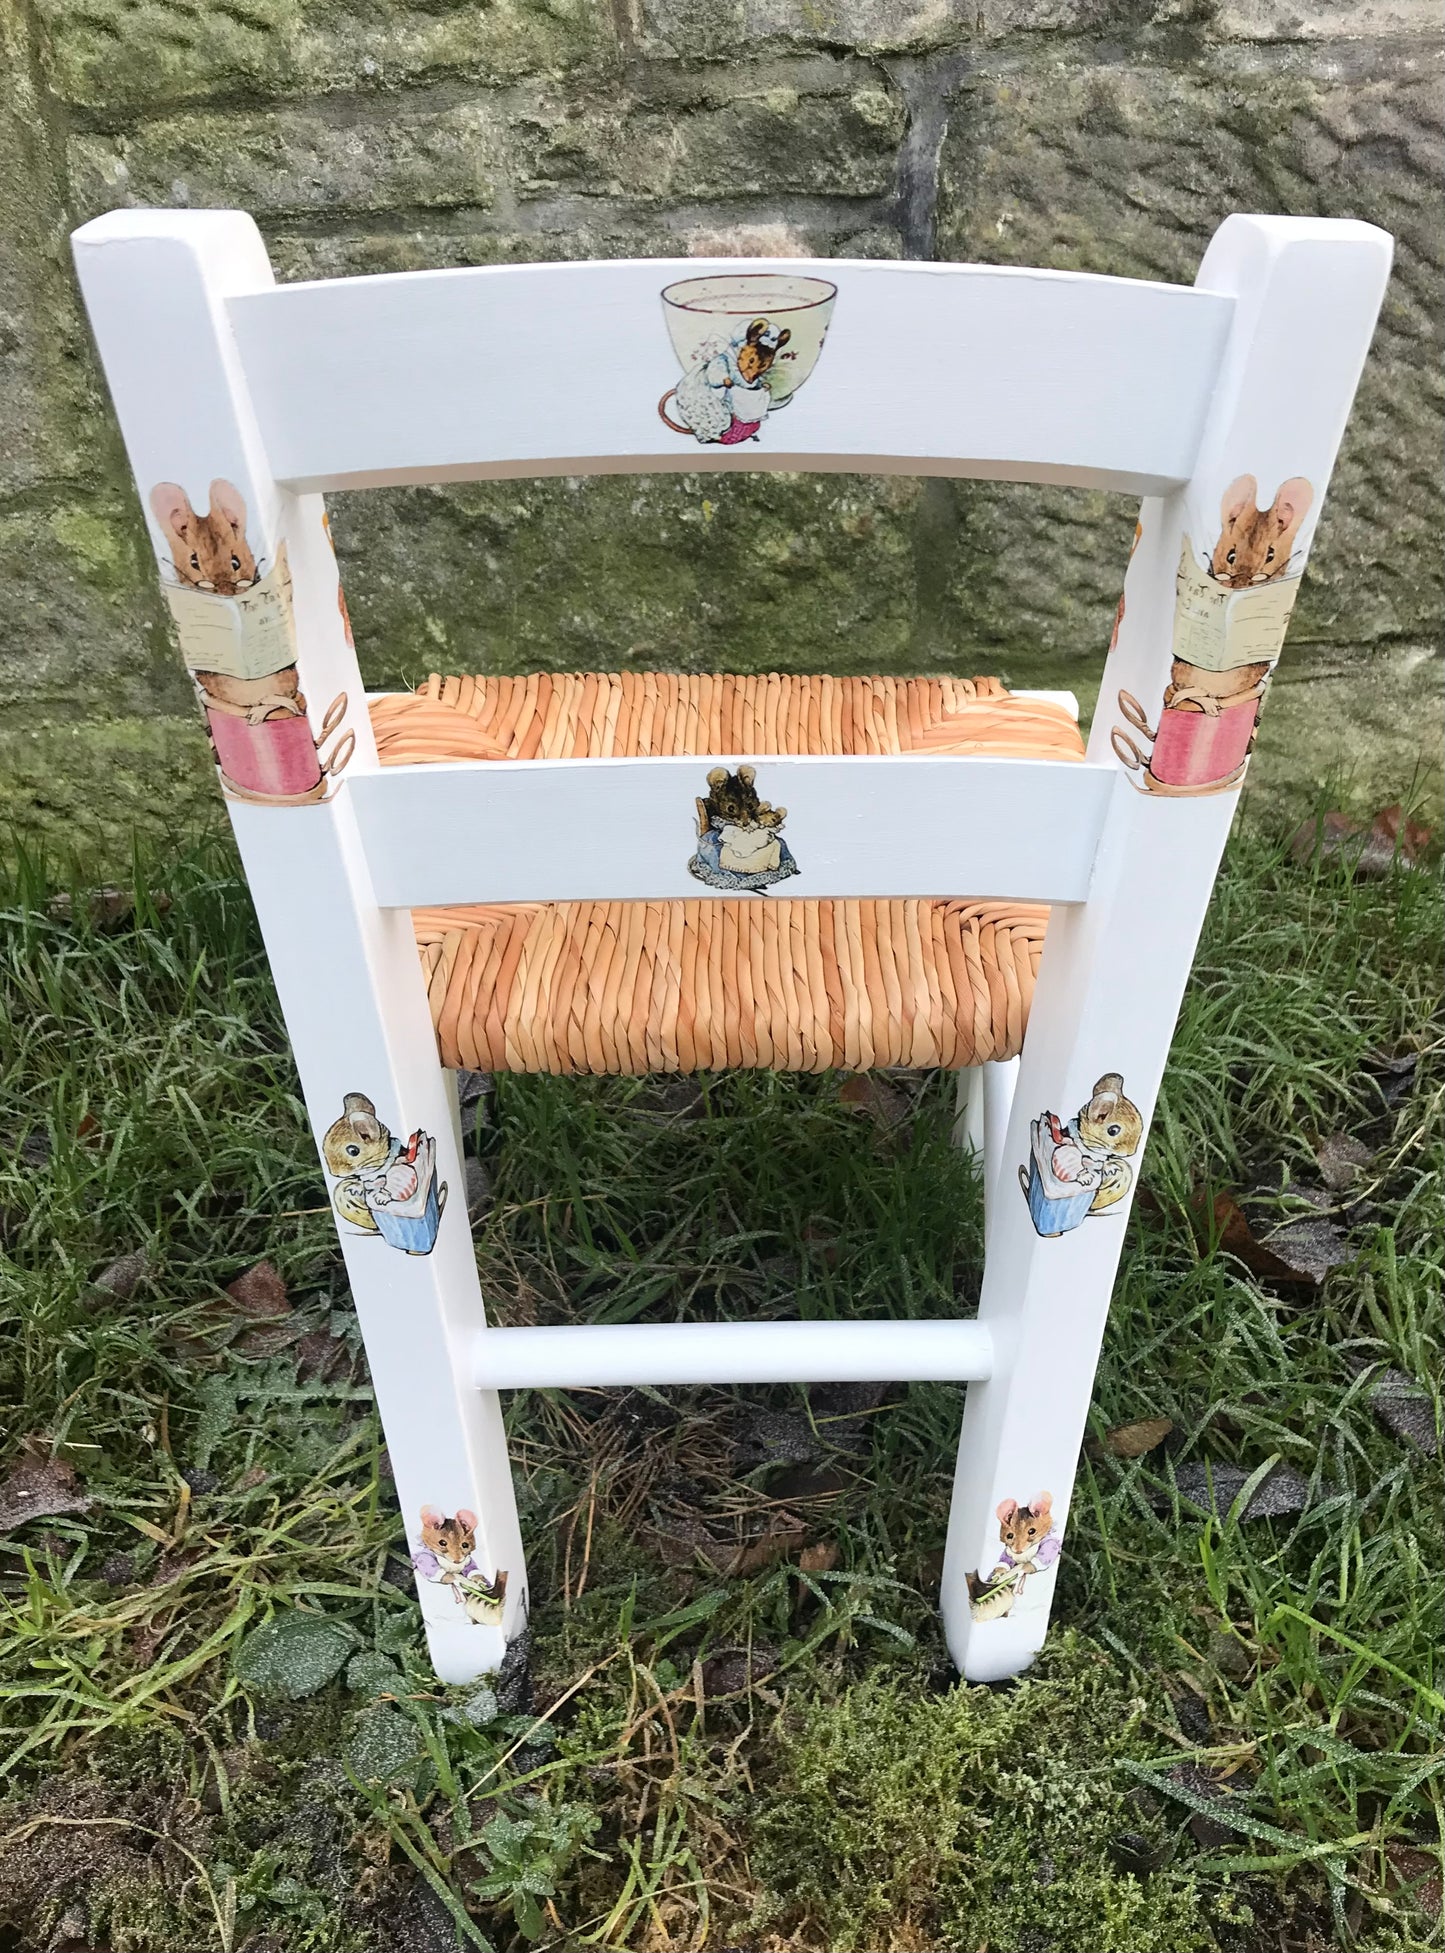 Rush seat personalised children's chair - Little Beatrix Potter Mice Theme - made to order